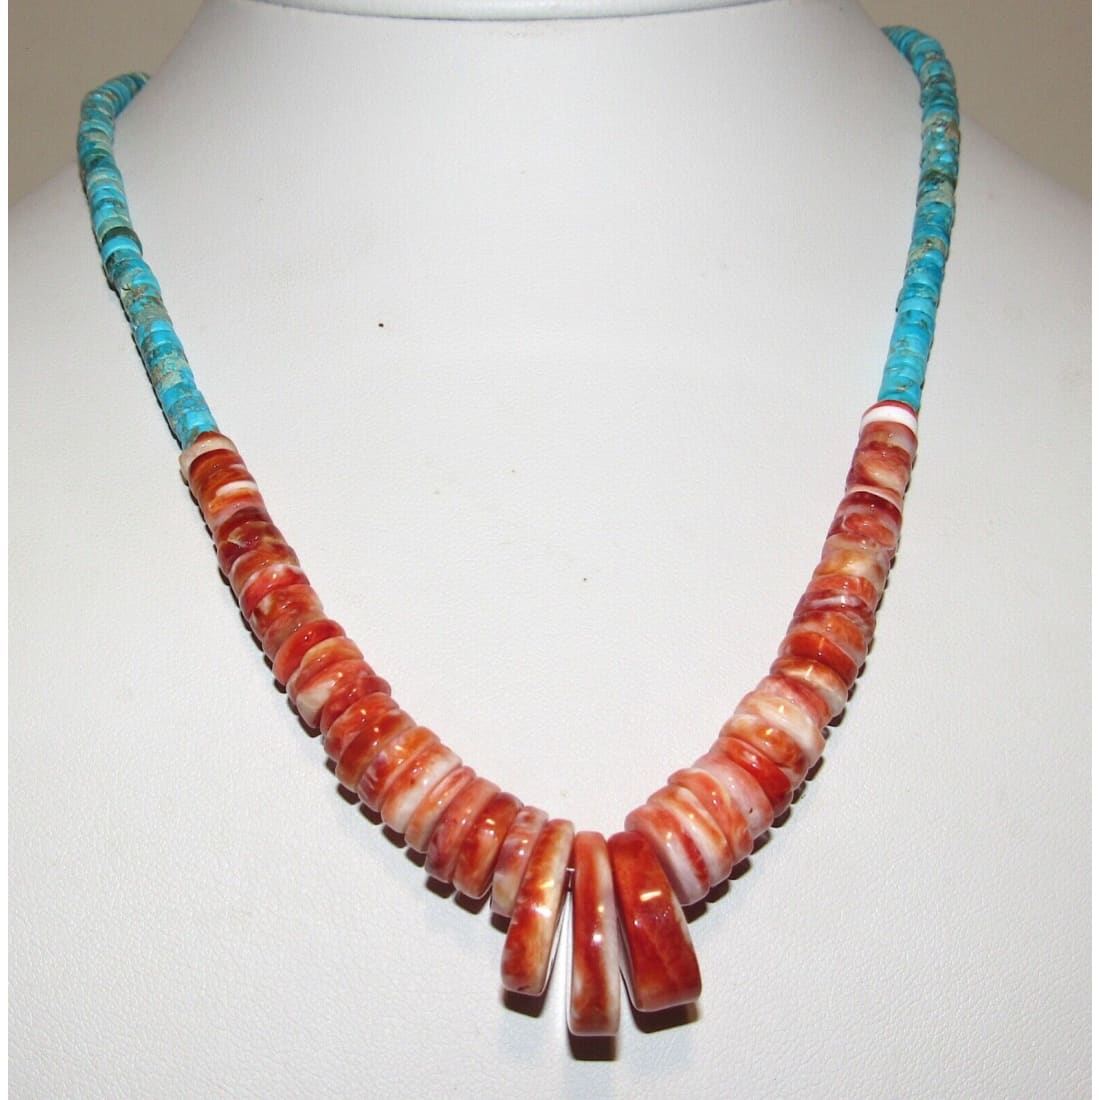 Navajo Red Spiny Oyster Kingman Turquoise Heishi Necklace 